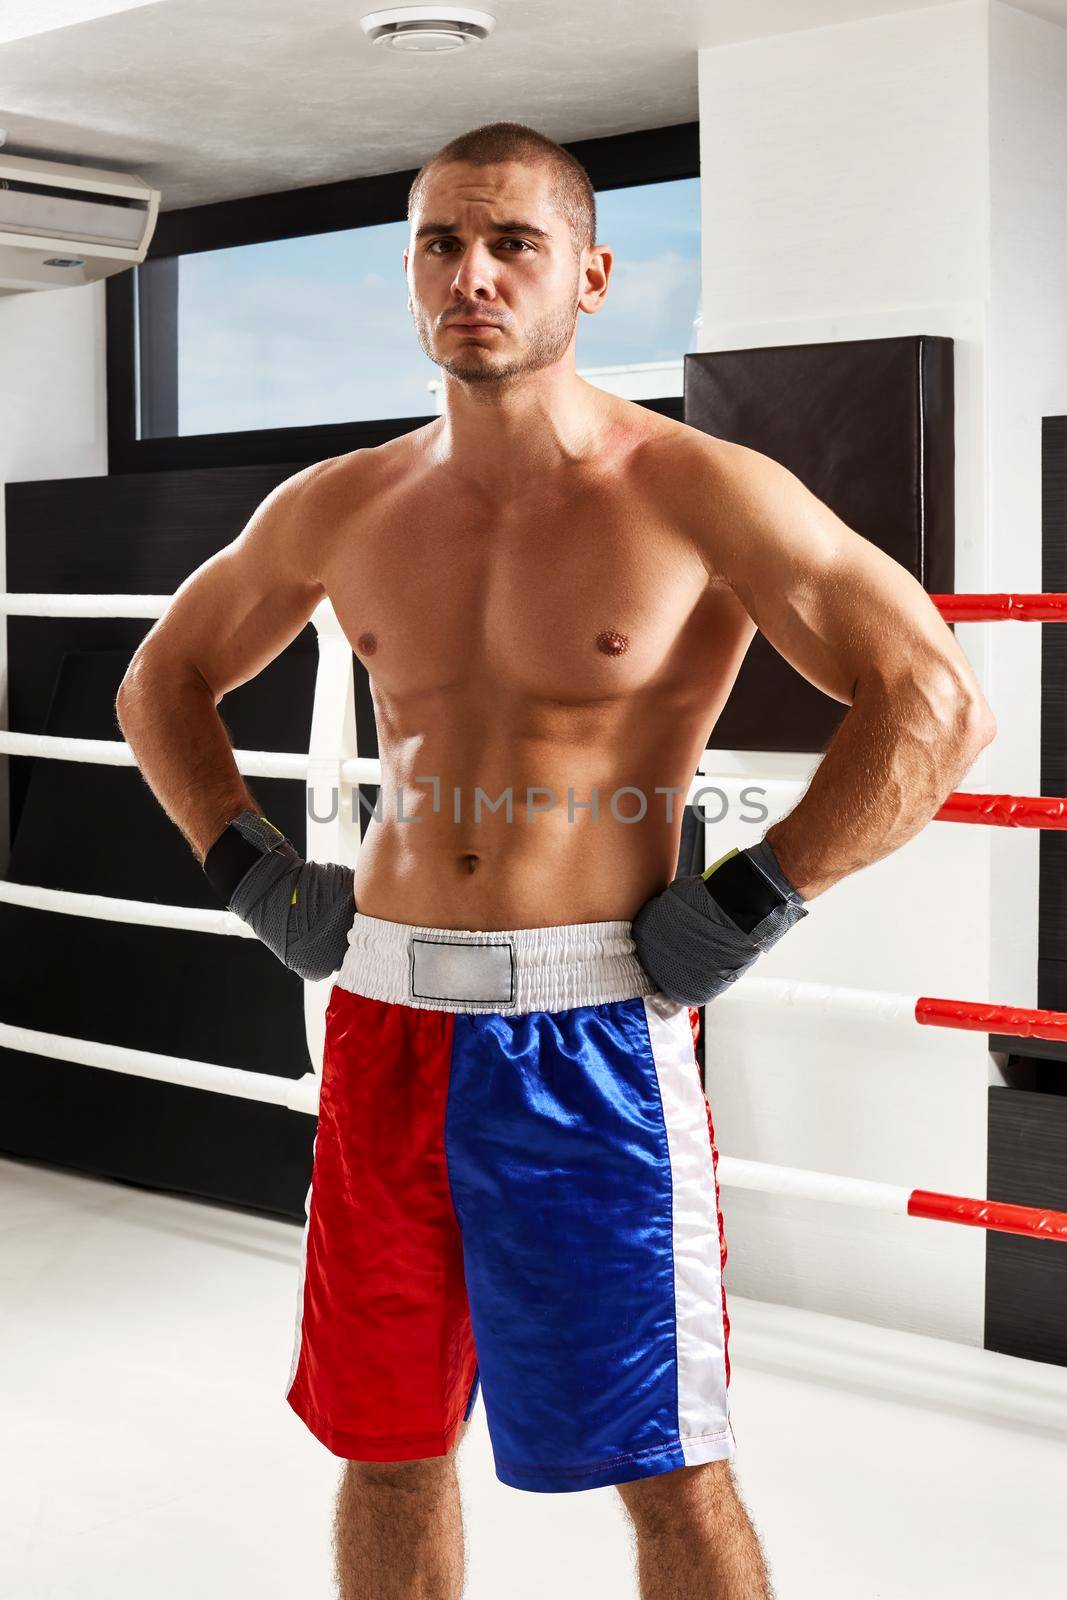 Boxer in grey gloves warming up in the gym. naked torso. He looks into the camera